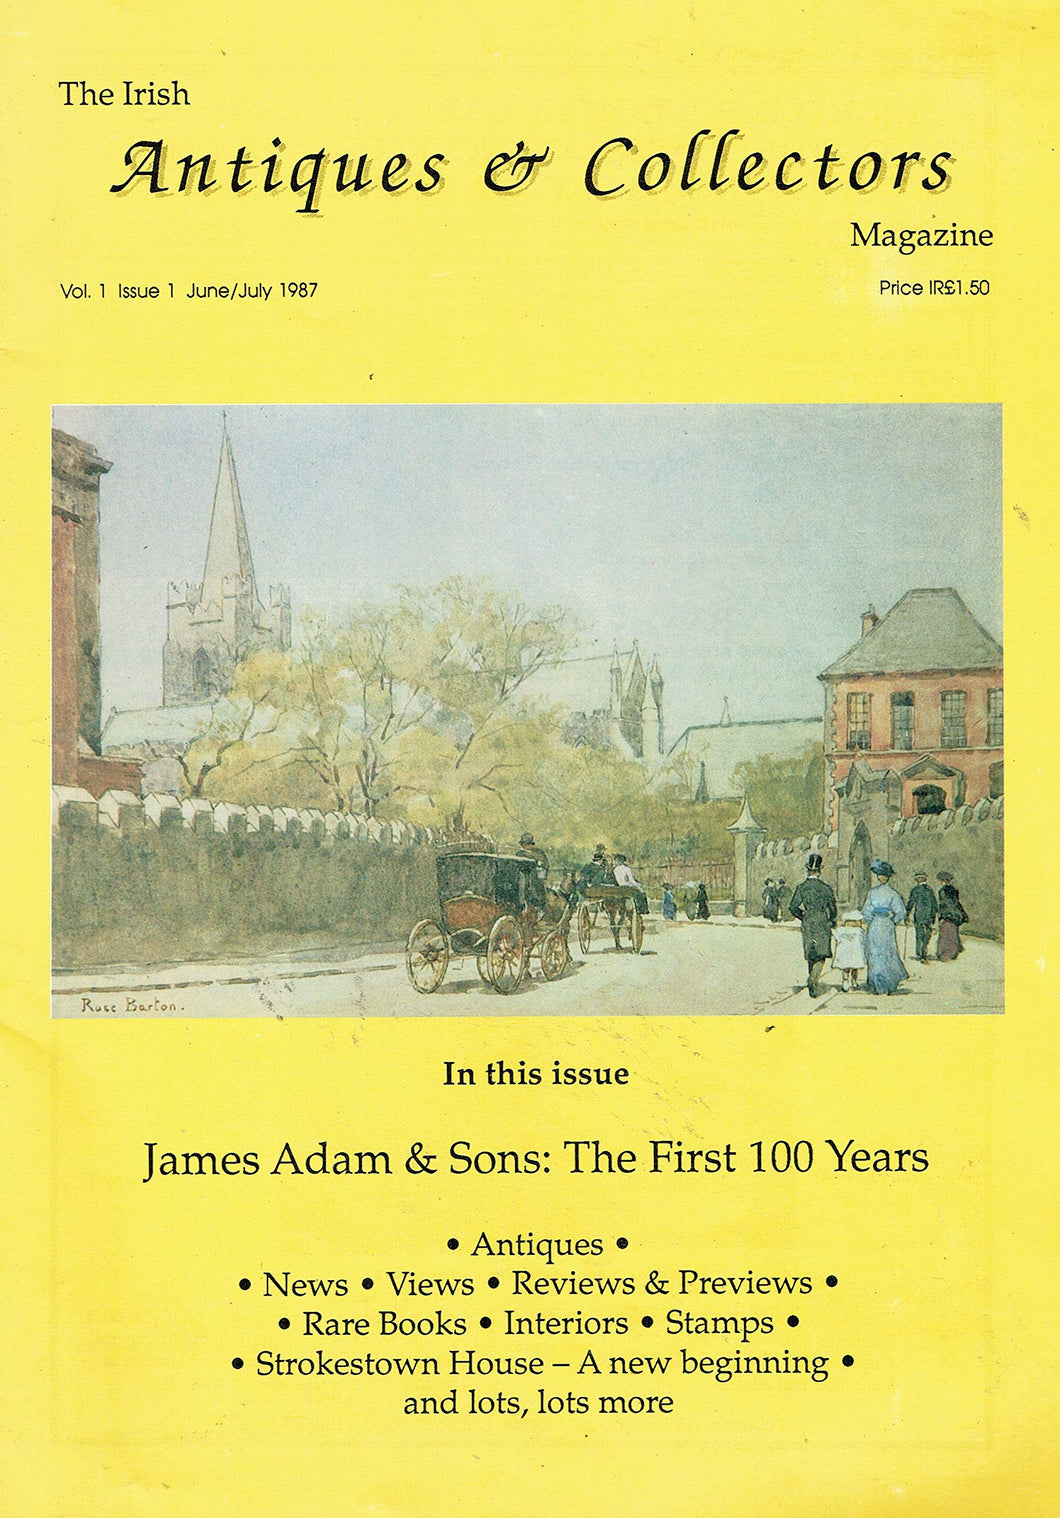 The Irish Antiques and Collectors Magazine - Volume 1, Issue 1, June/July 1987